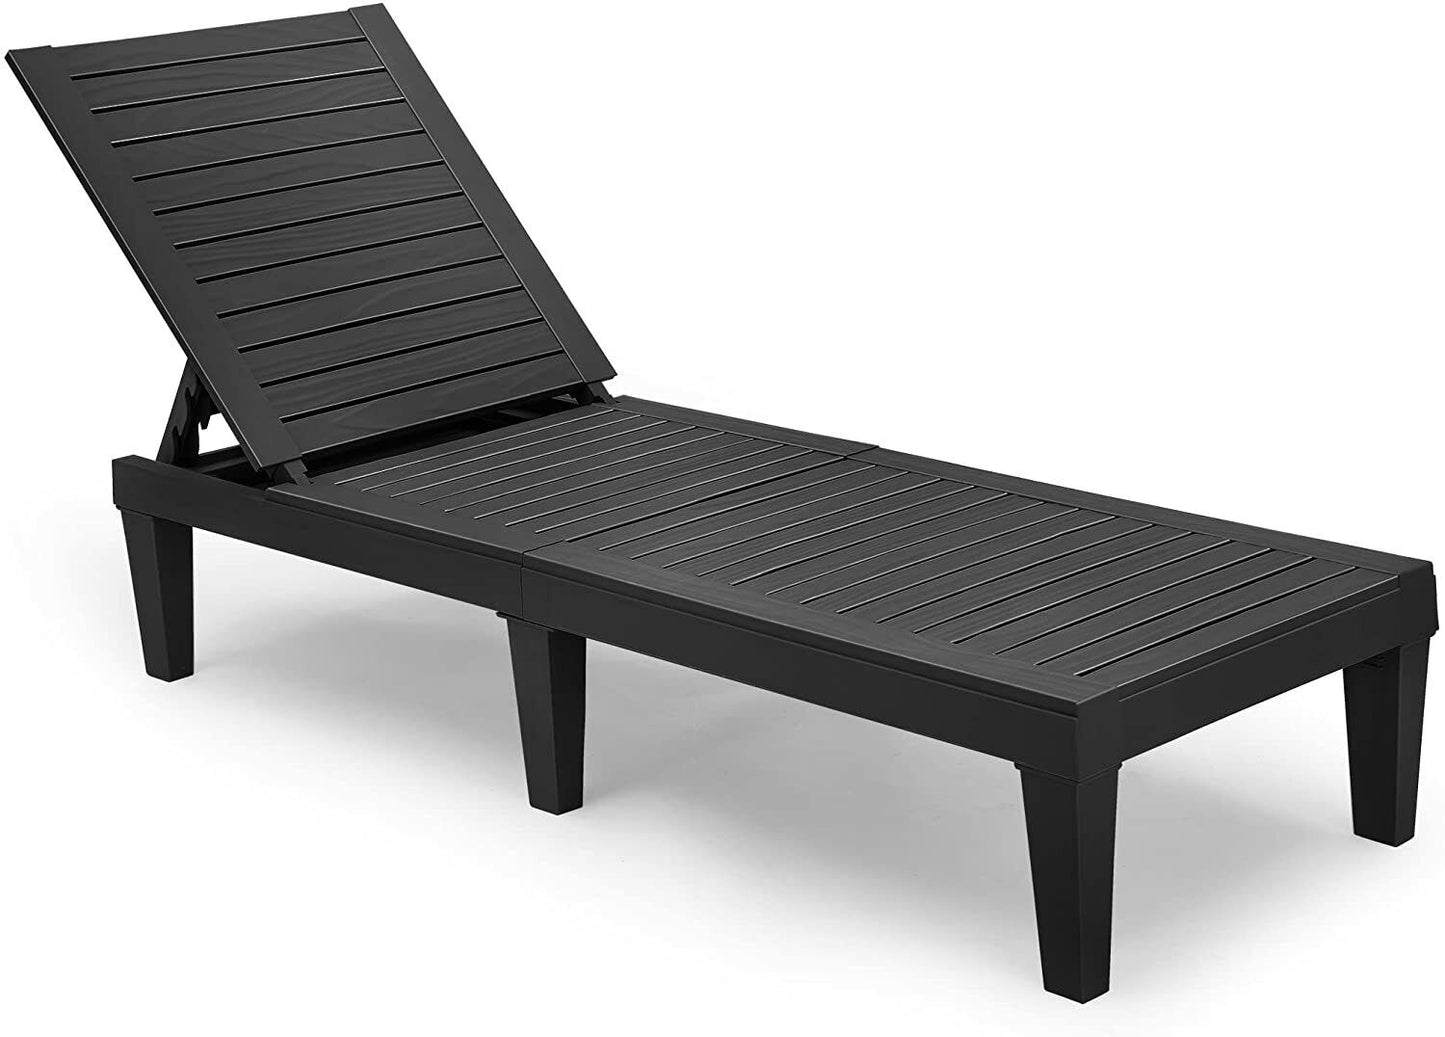 2 Piece Patio Reclining Chairs